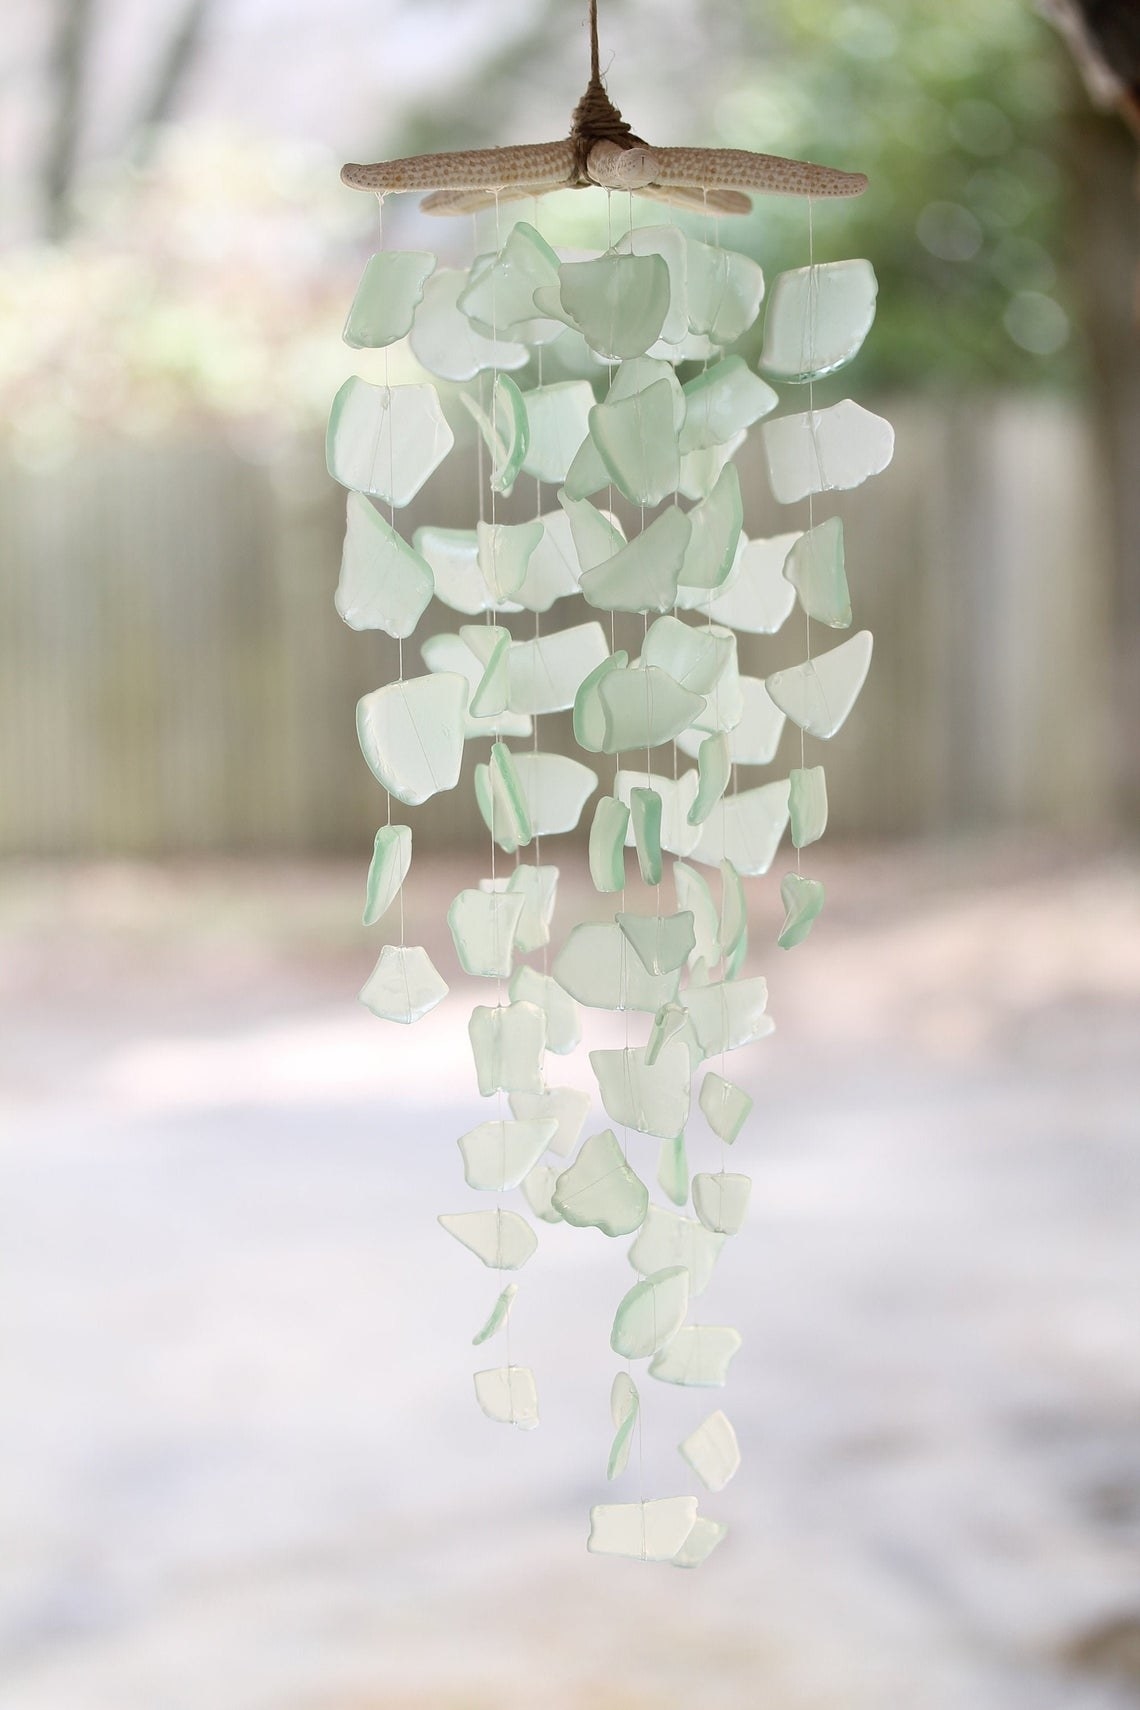 Soft green sea glass shards hung from a starfish into a chime 